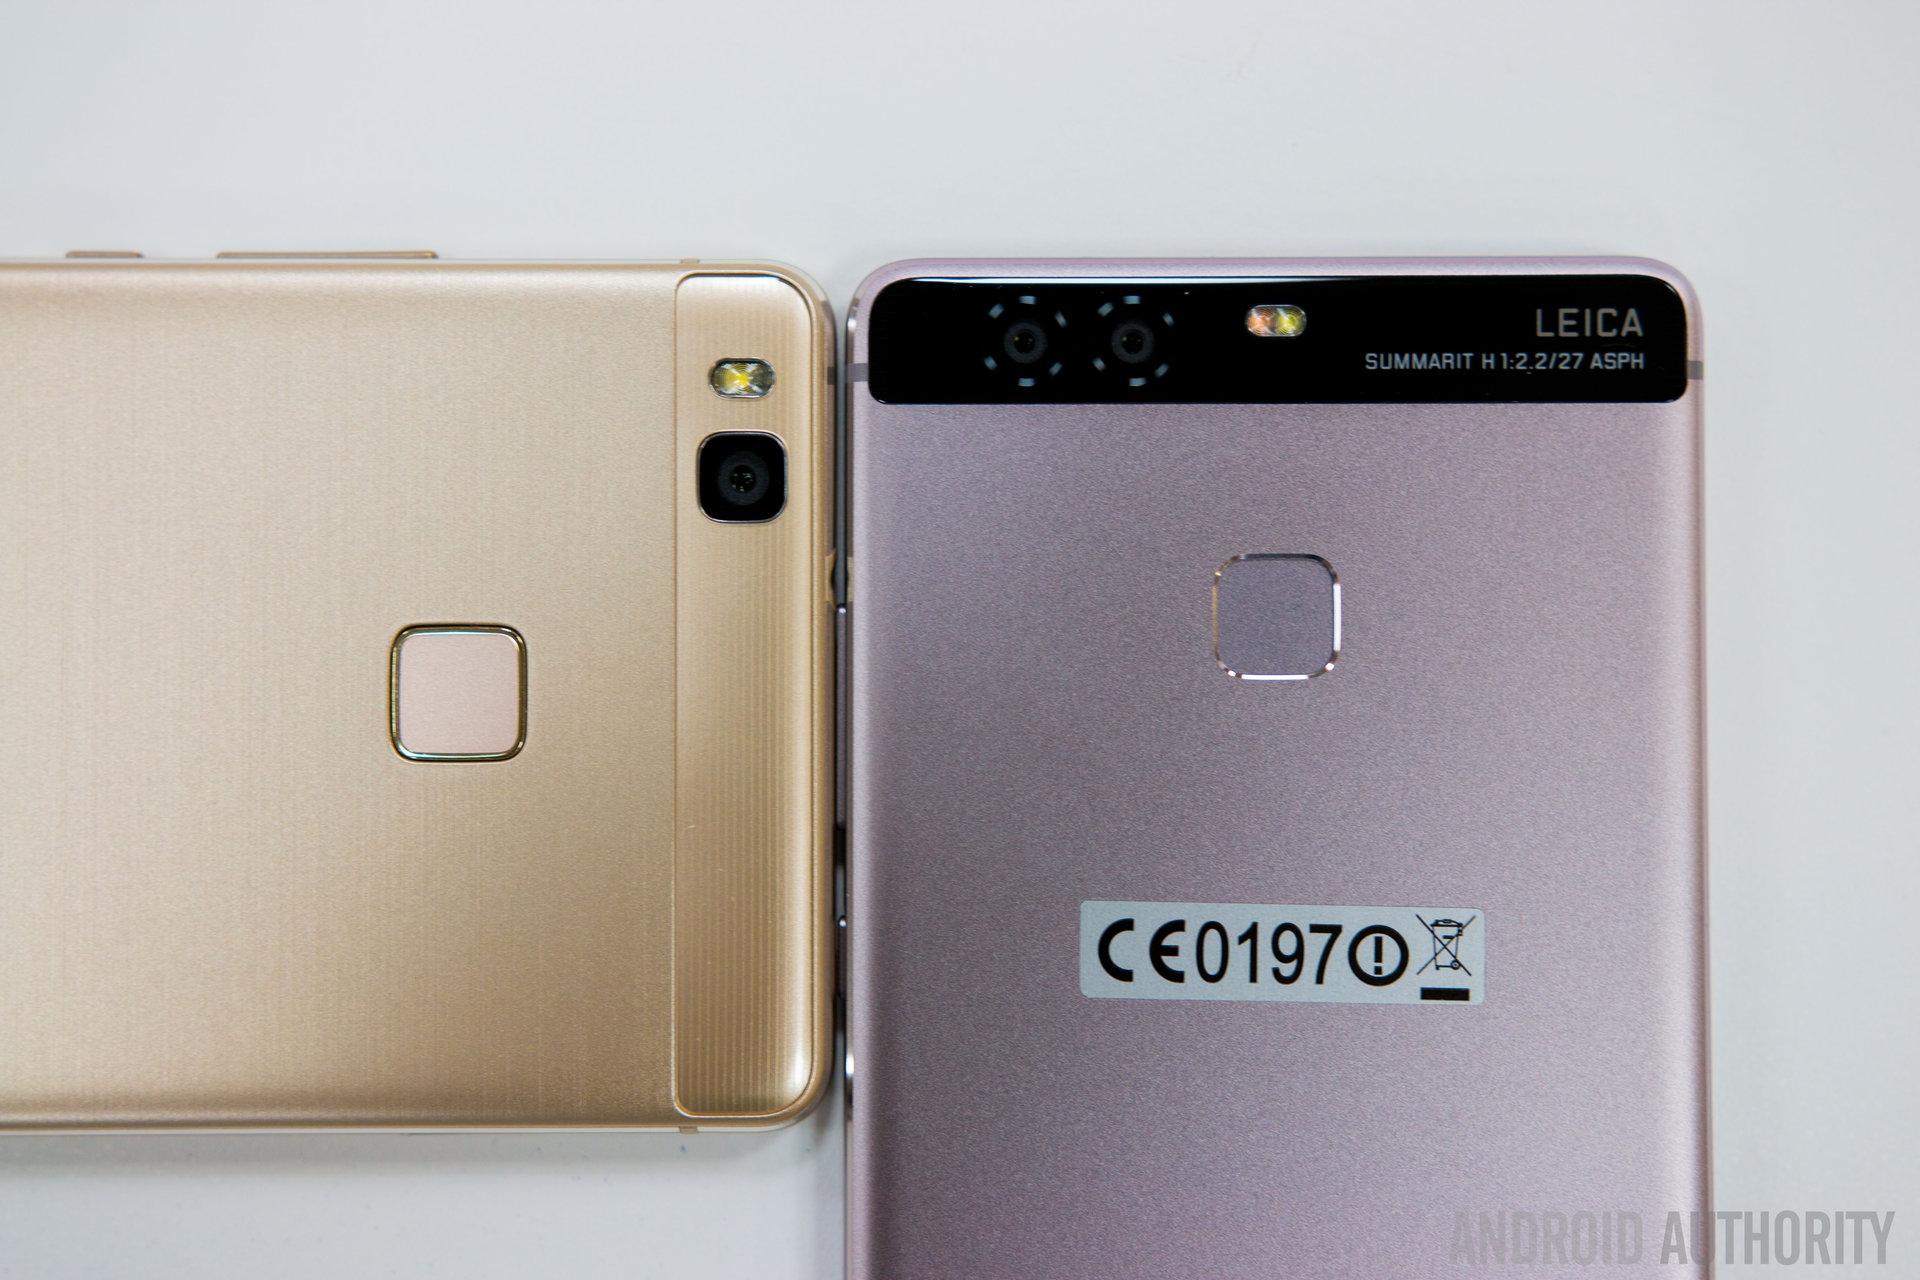 HUAWEI P9 vs HUAWEI P9 quick look Android